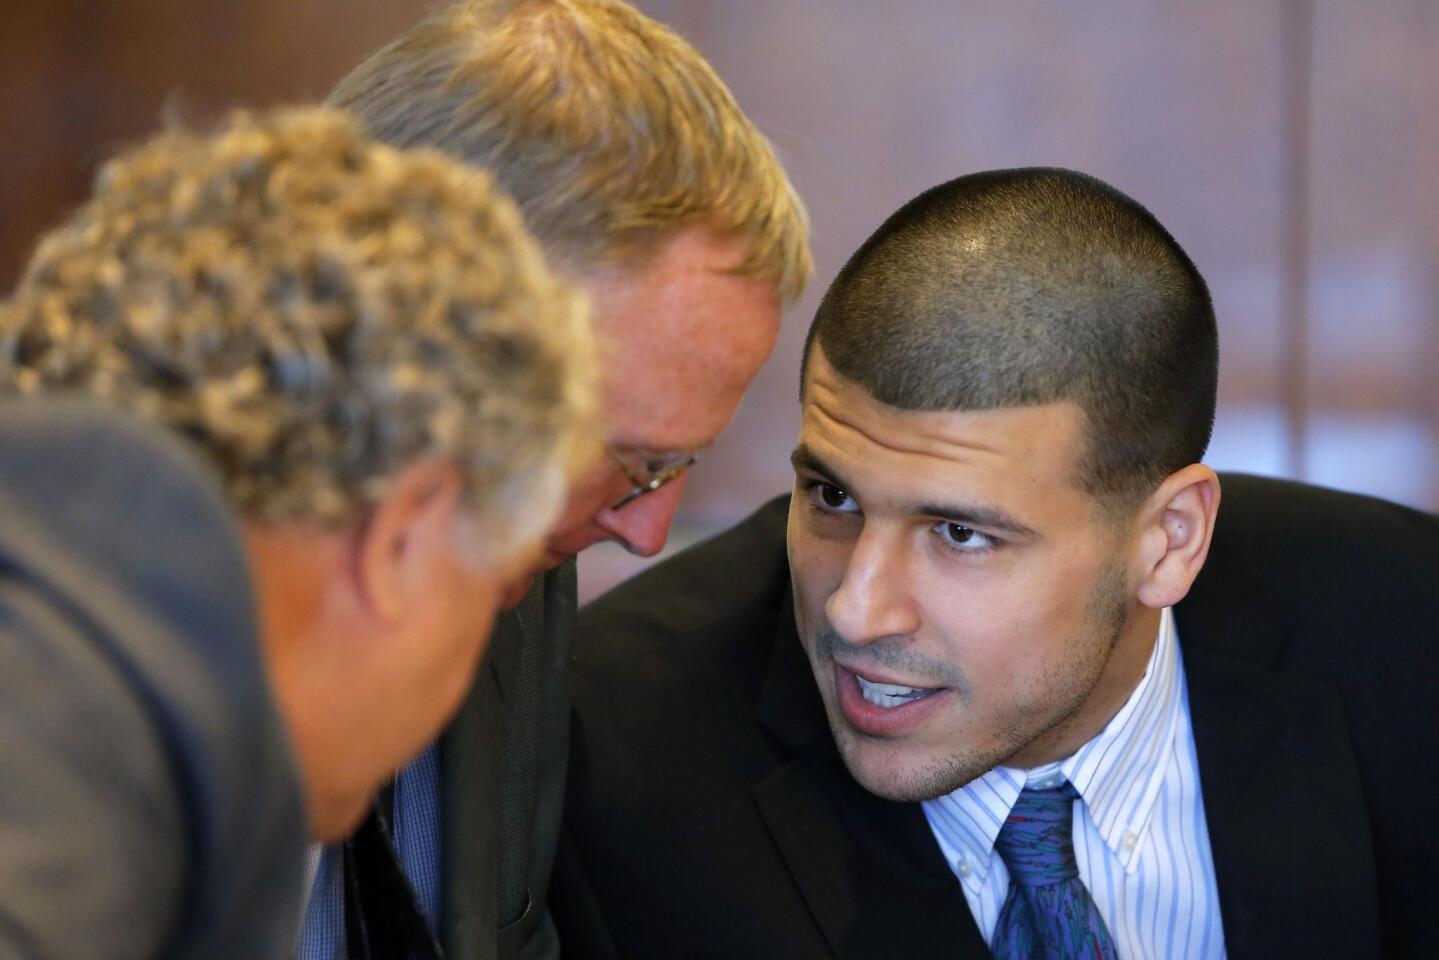 Aaron Hernandez (R), former player for the NFL's New England Patriots football team, talks to defense attorneys Michael Fee (L) and Charles Rankin during a court appearance at the Bristol County Superior Court in Fall River, Massachusetts October 9, 2013, in connection with the death of semi-pro football player Odin Lloyd in June. Hernandez, who was a rising star in the NFL before his arrest and release by the Patriots, has pleaded not guilty.